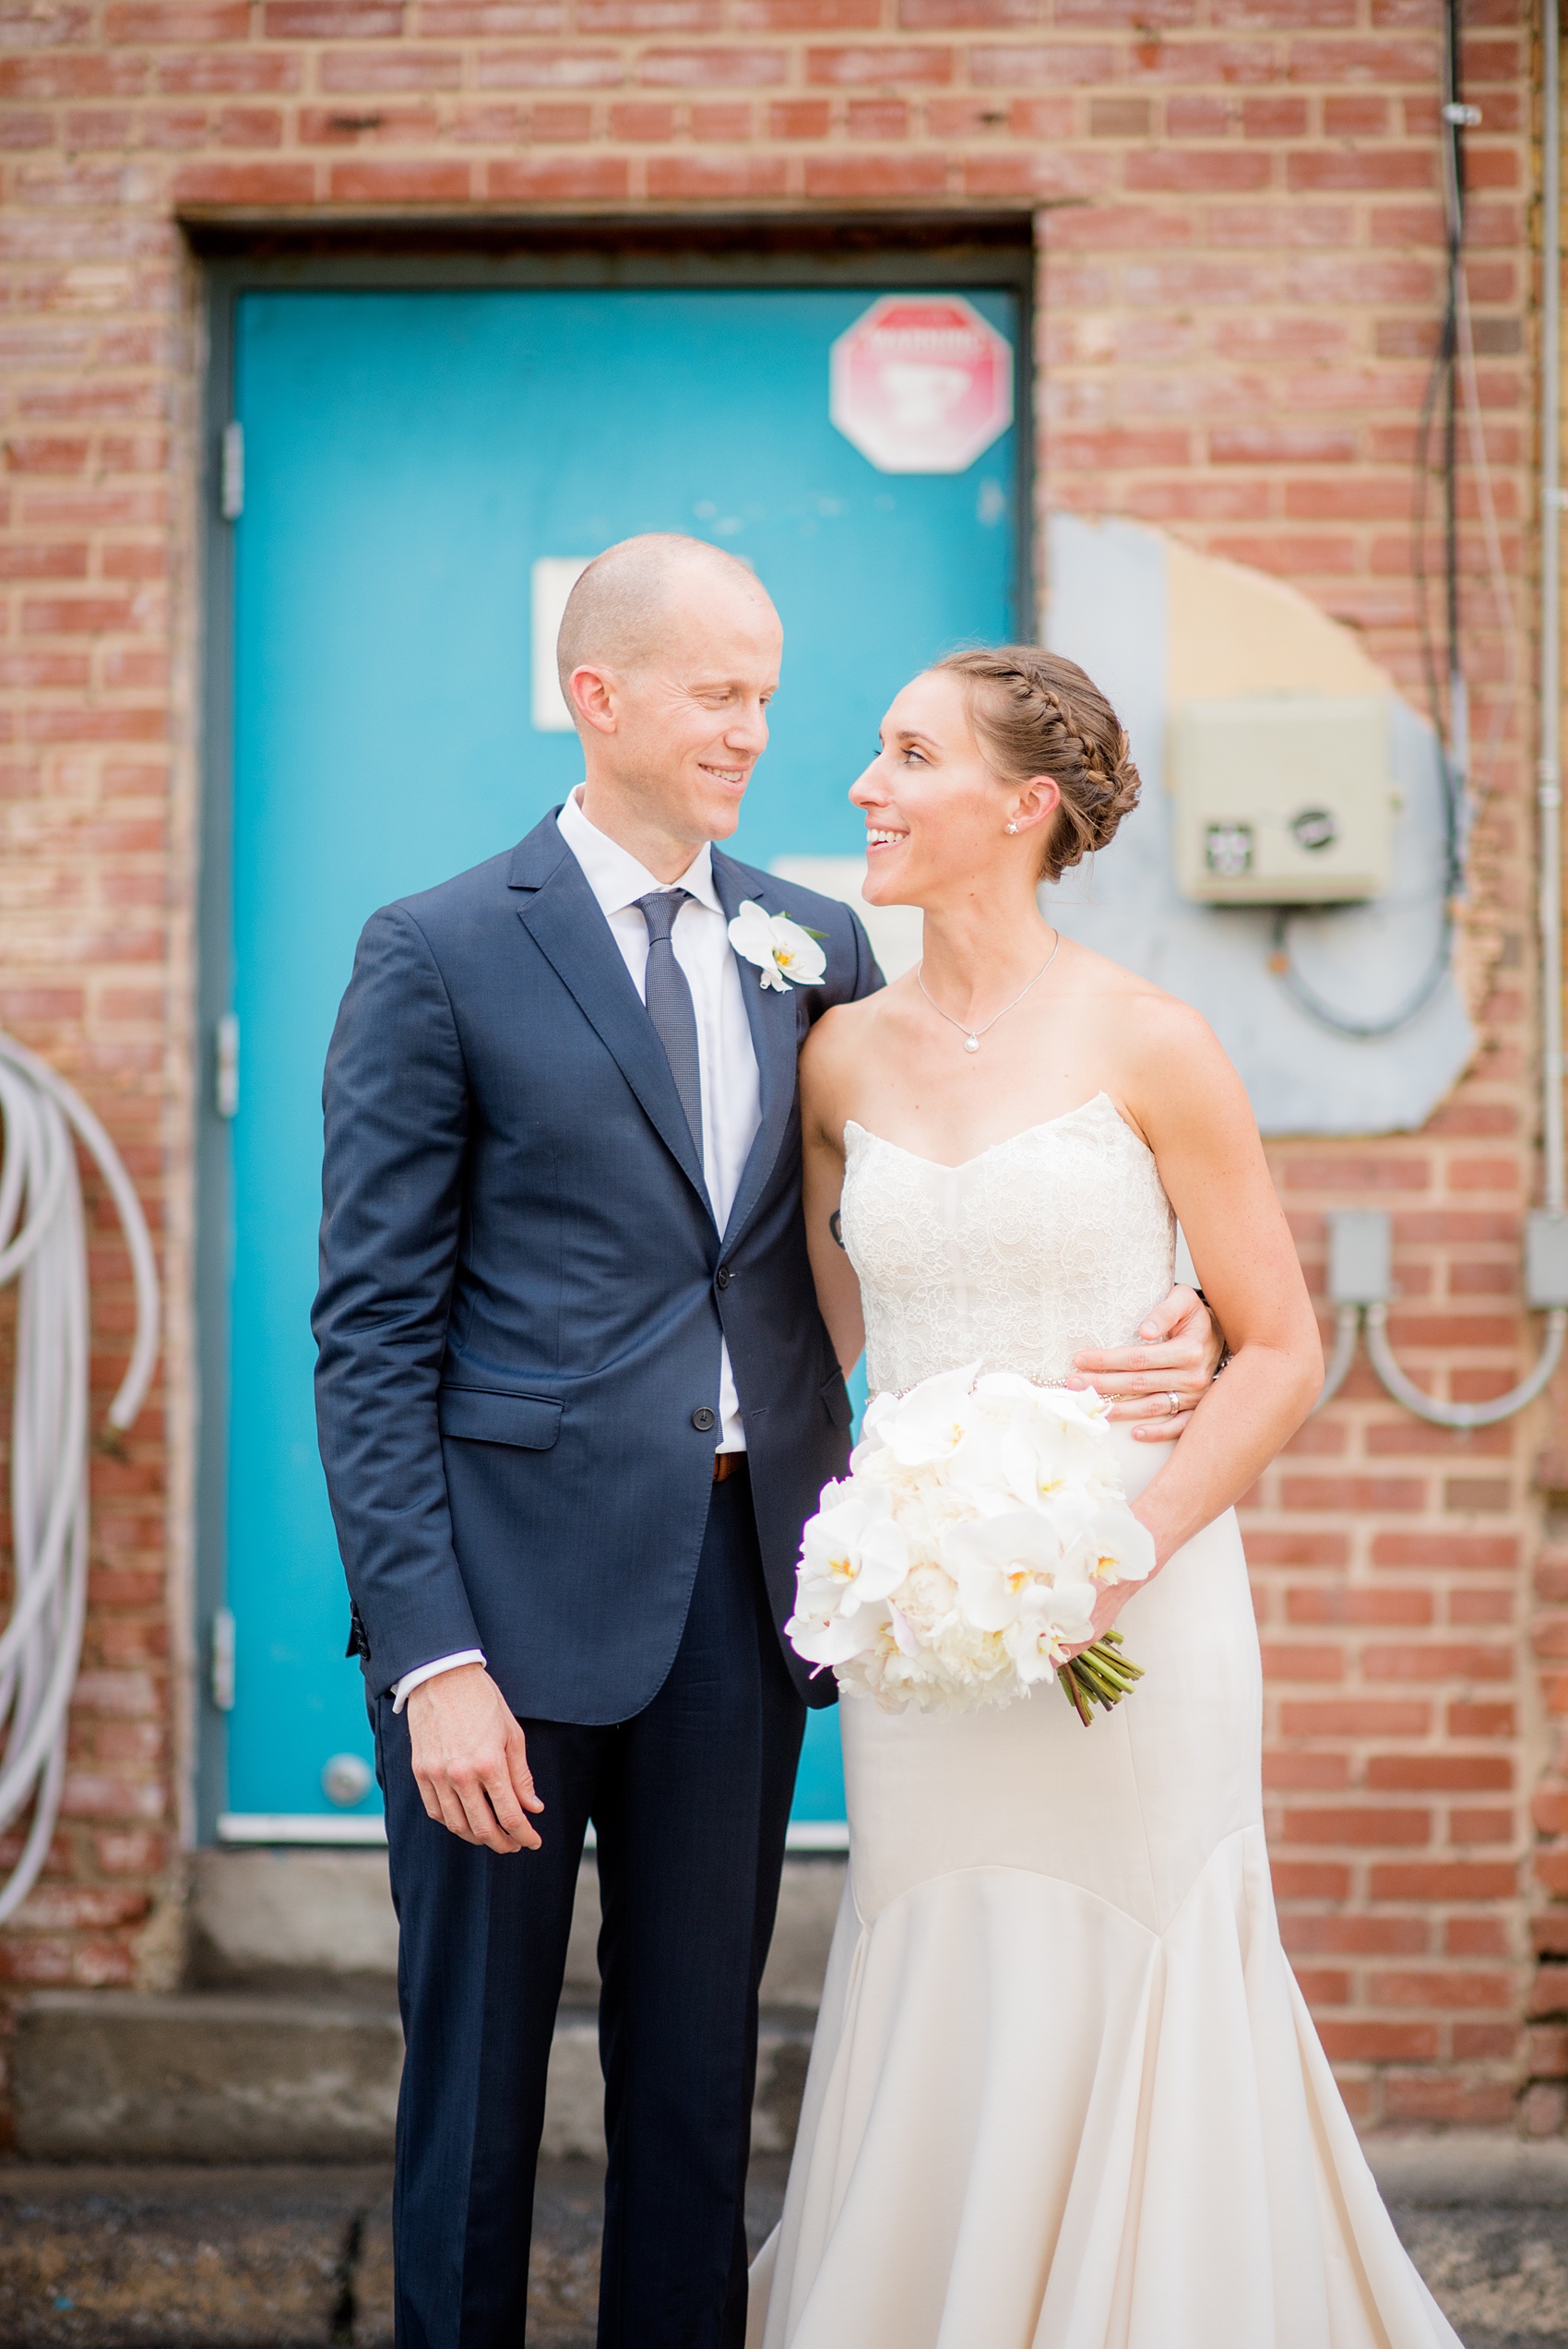 The Cookery Durham wedding photos by Mikkel Paige Photography. Picture of the bride and groom with white orchid flowers in front of a colorful door and brick wall in an urban setting.